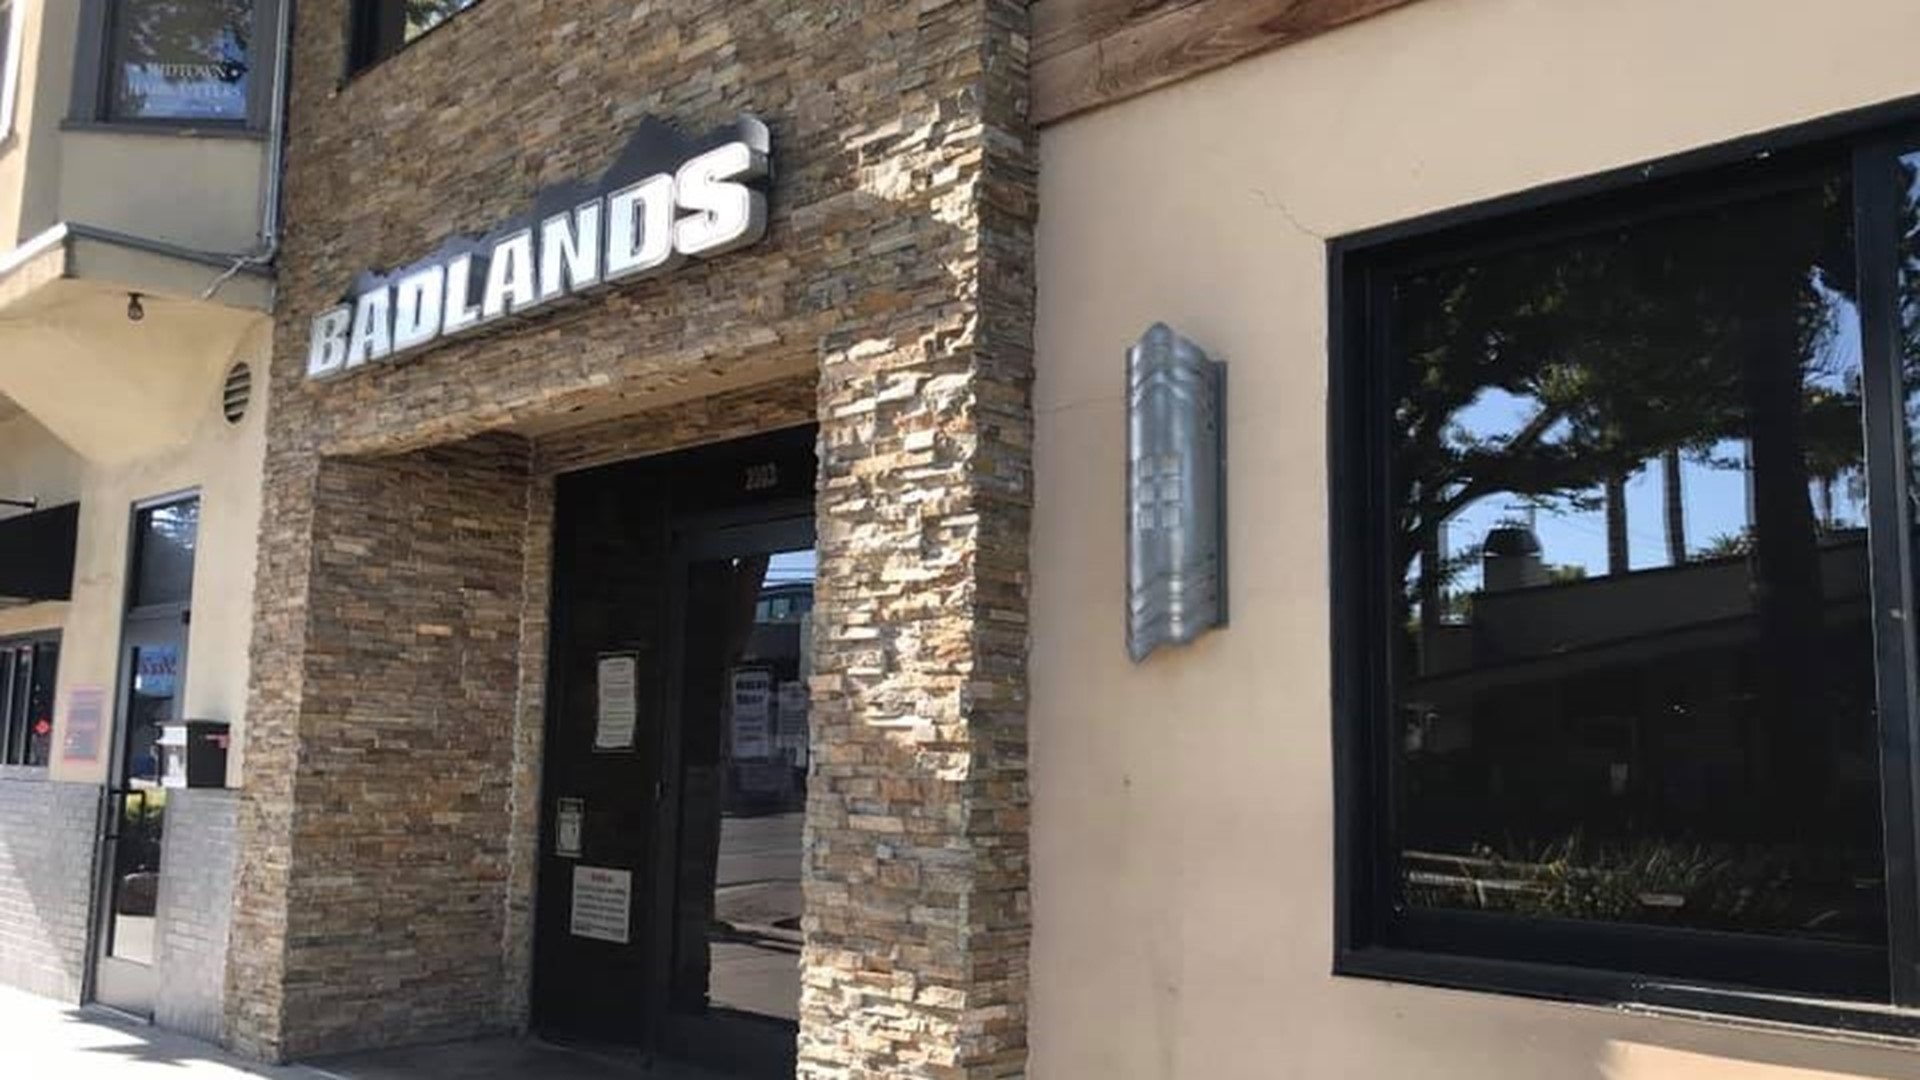 The Depot, Badlands, and Corti Brothers have all temporarily closed to deep clean following revelations that someone tested positive for coronavirus.